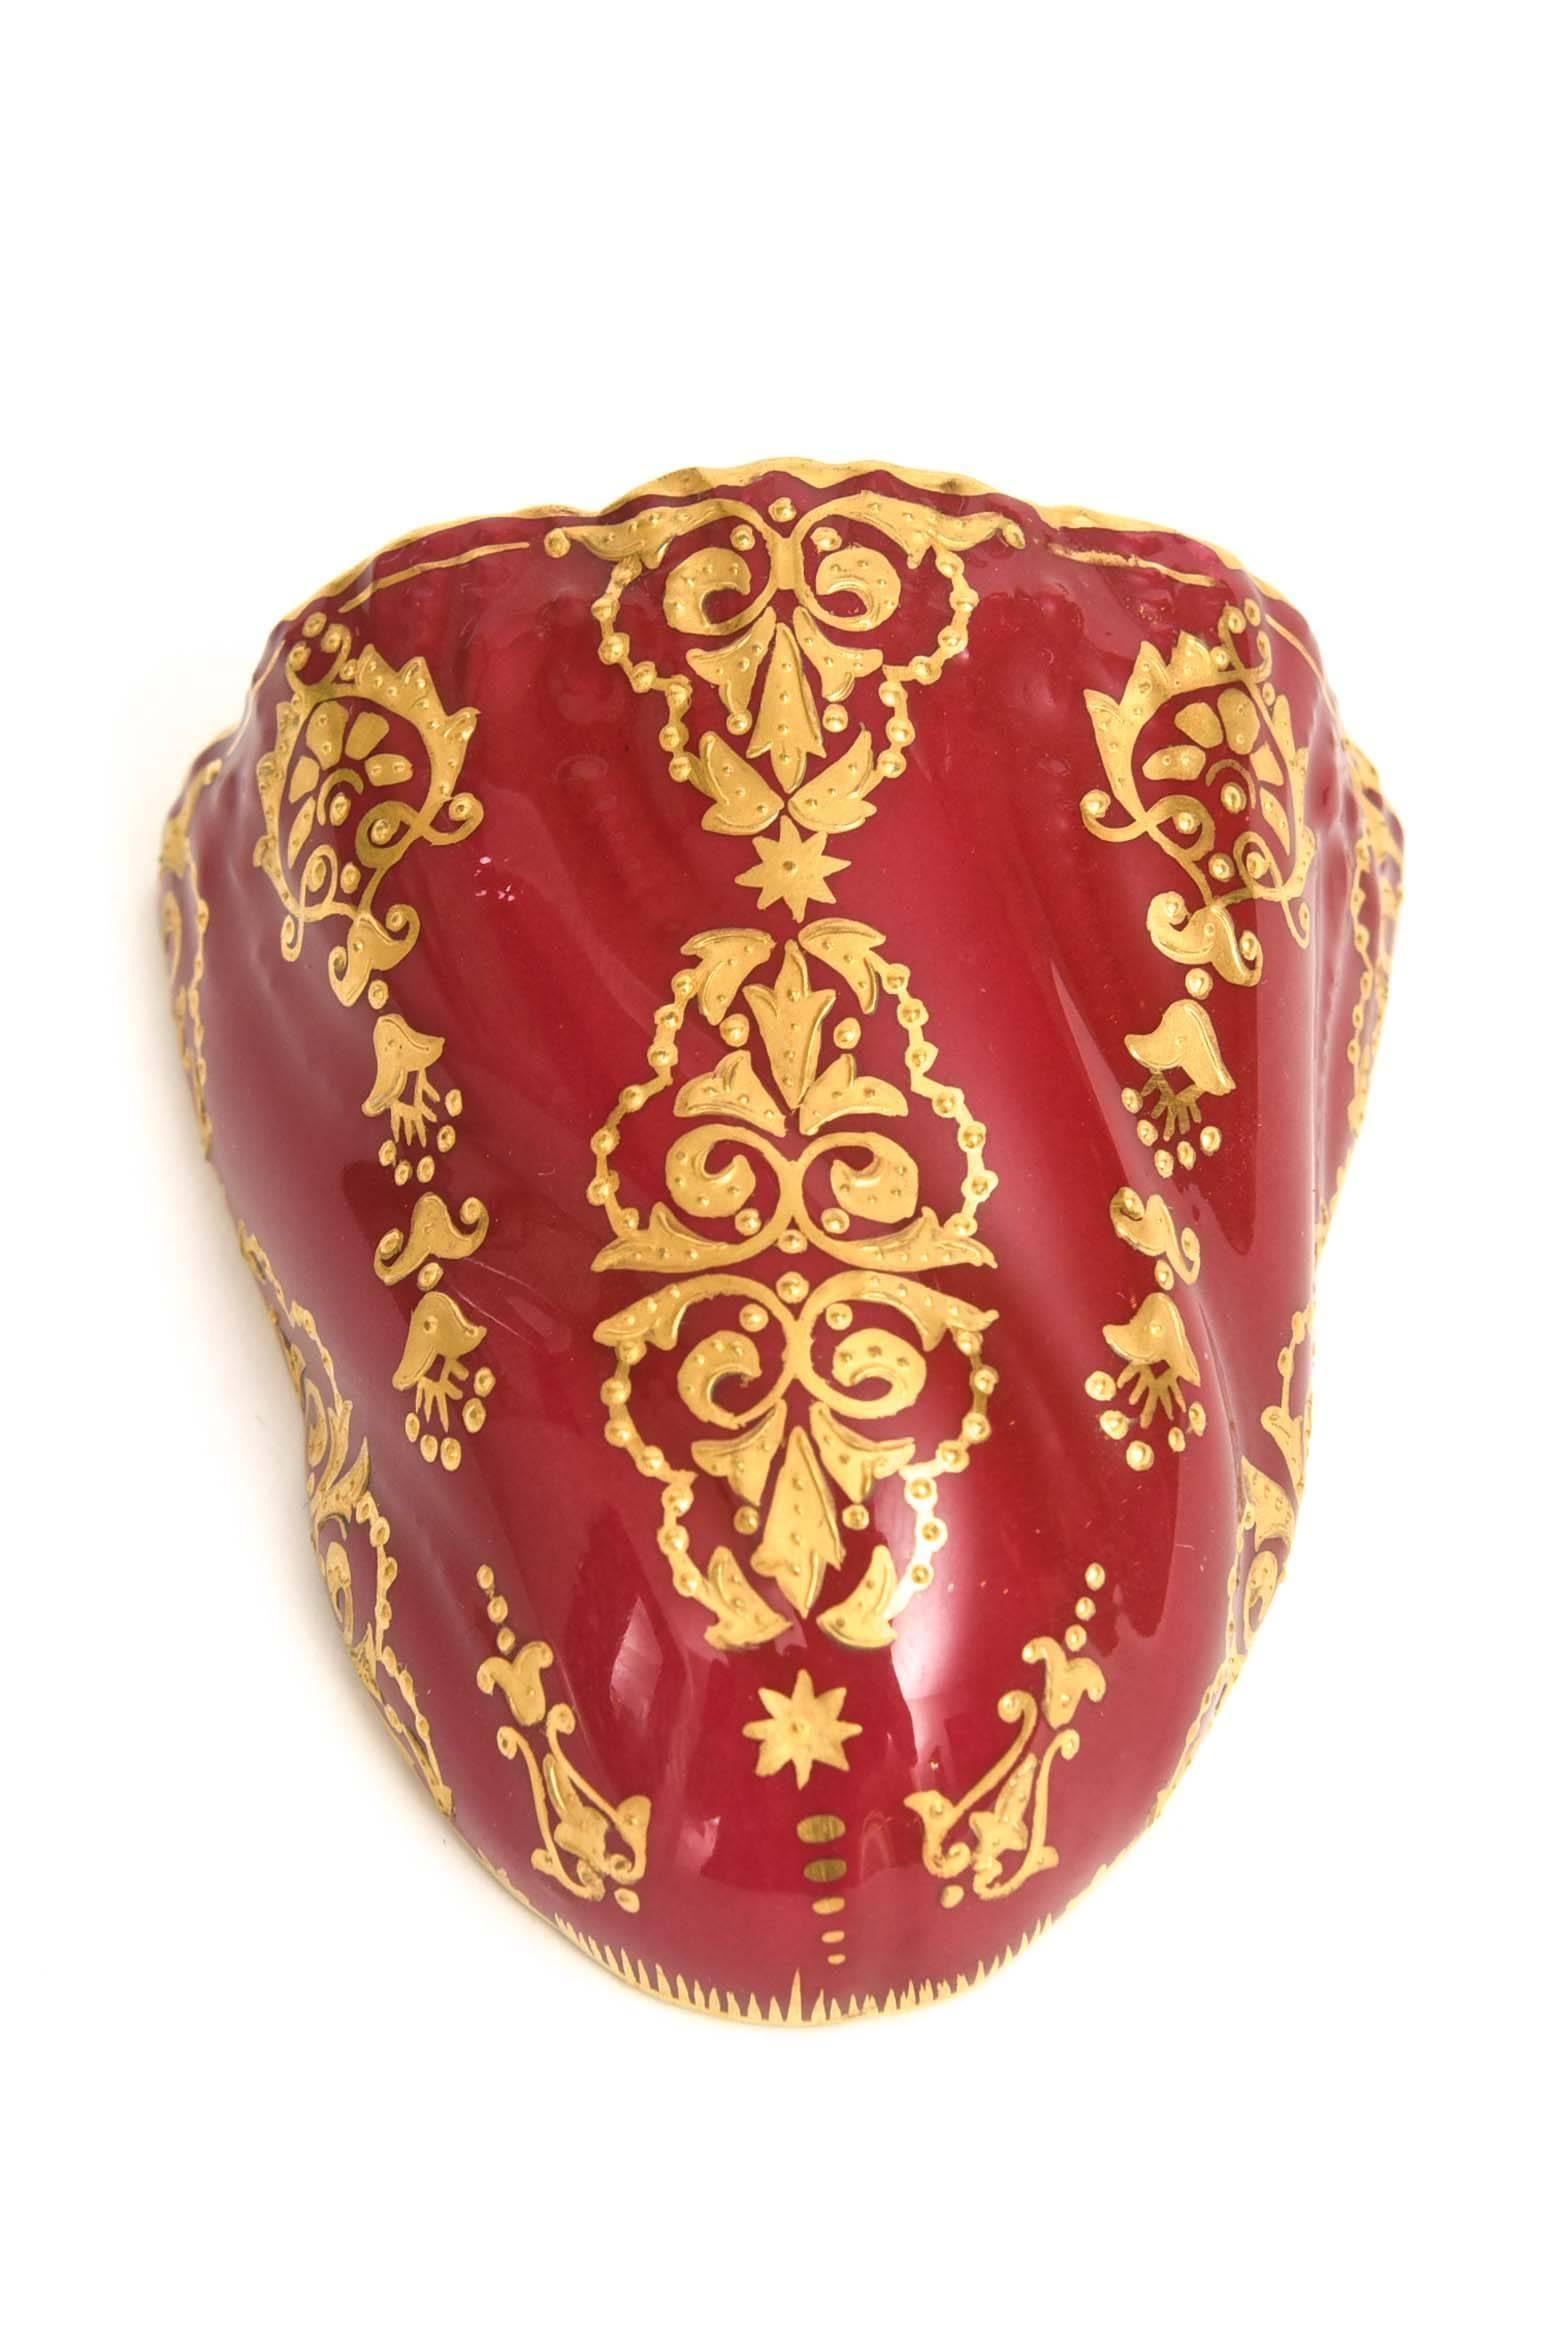 English Charming Wall Pocket by Coalport, England, a Ruby Red and Gilt Encrusted Jem